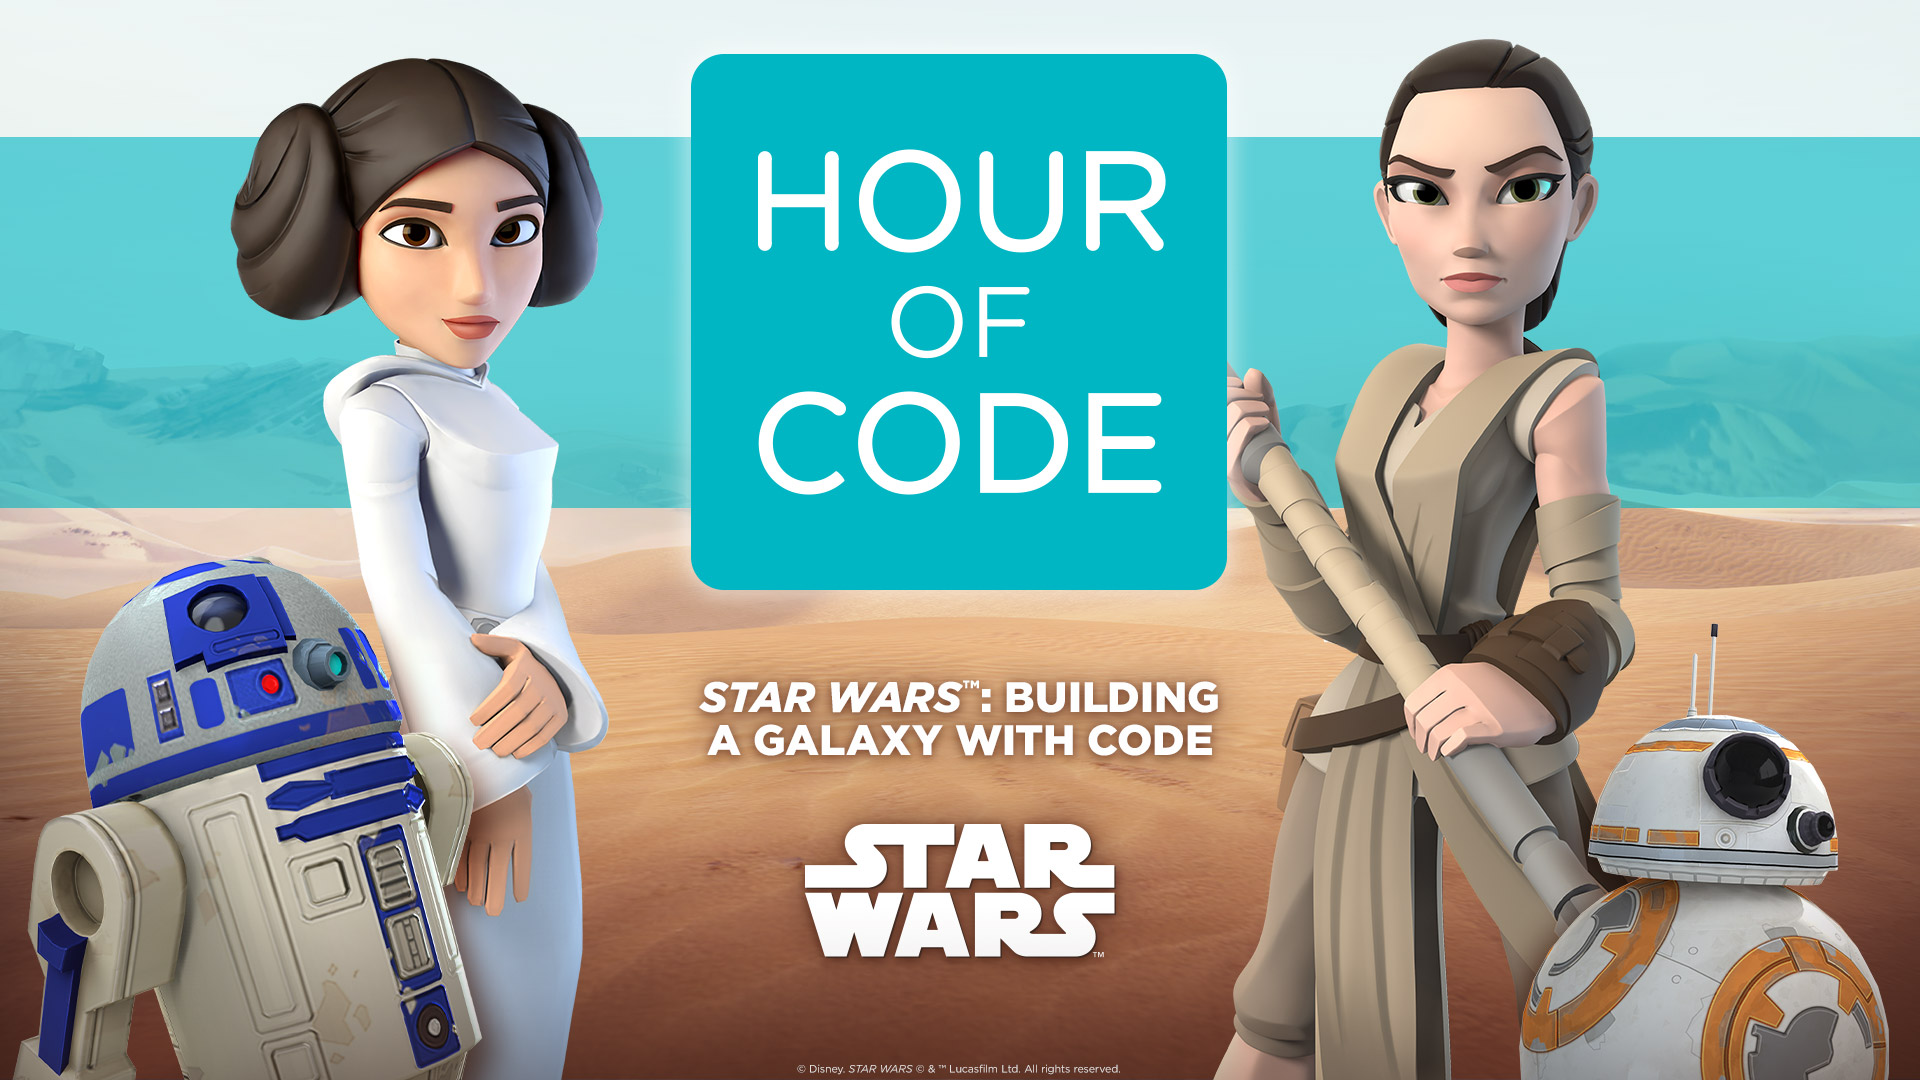 Code.org, Disney and Star Wars Launch Hour of Code “Build-Your-Own-Game” Tutorial to Broaden Computer Science Participation